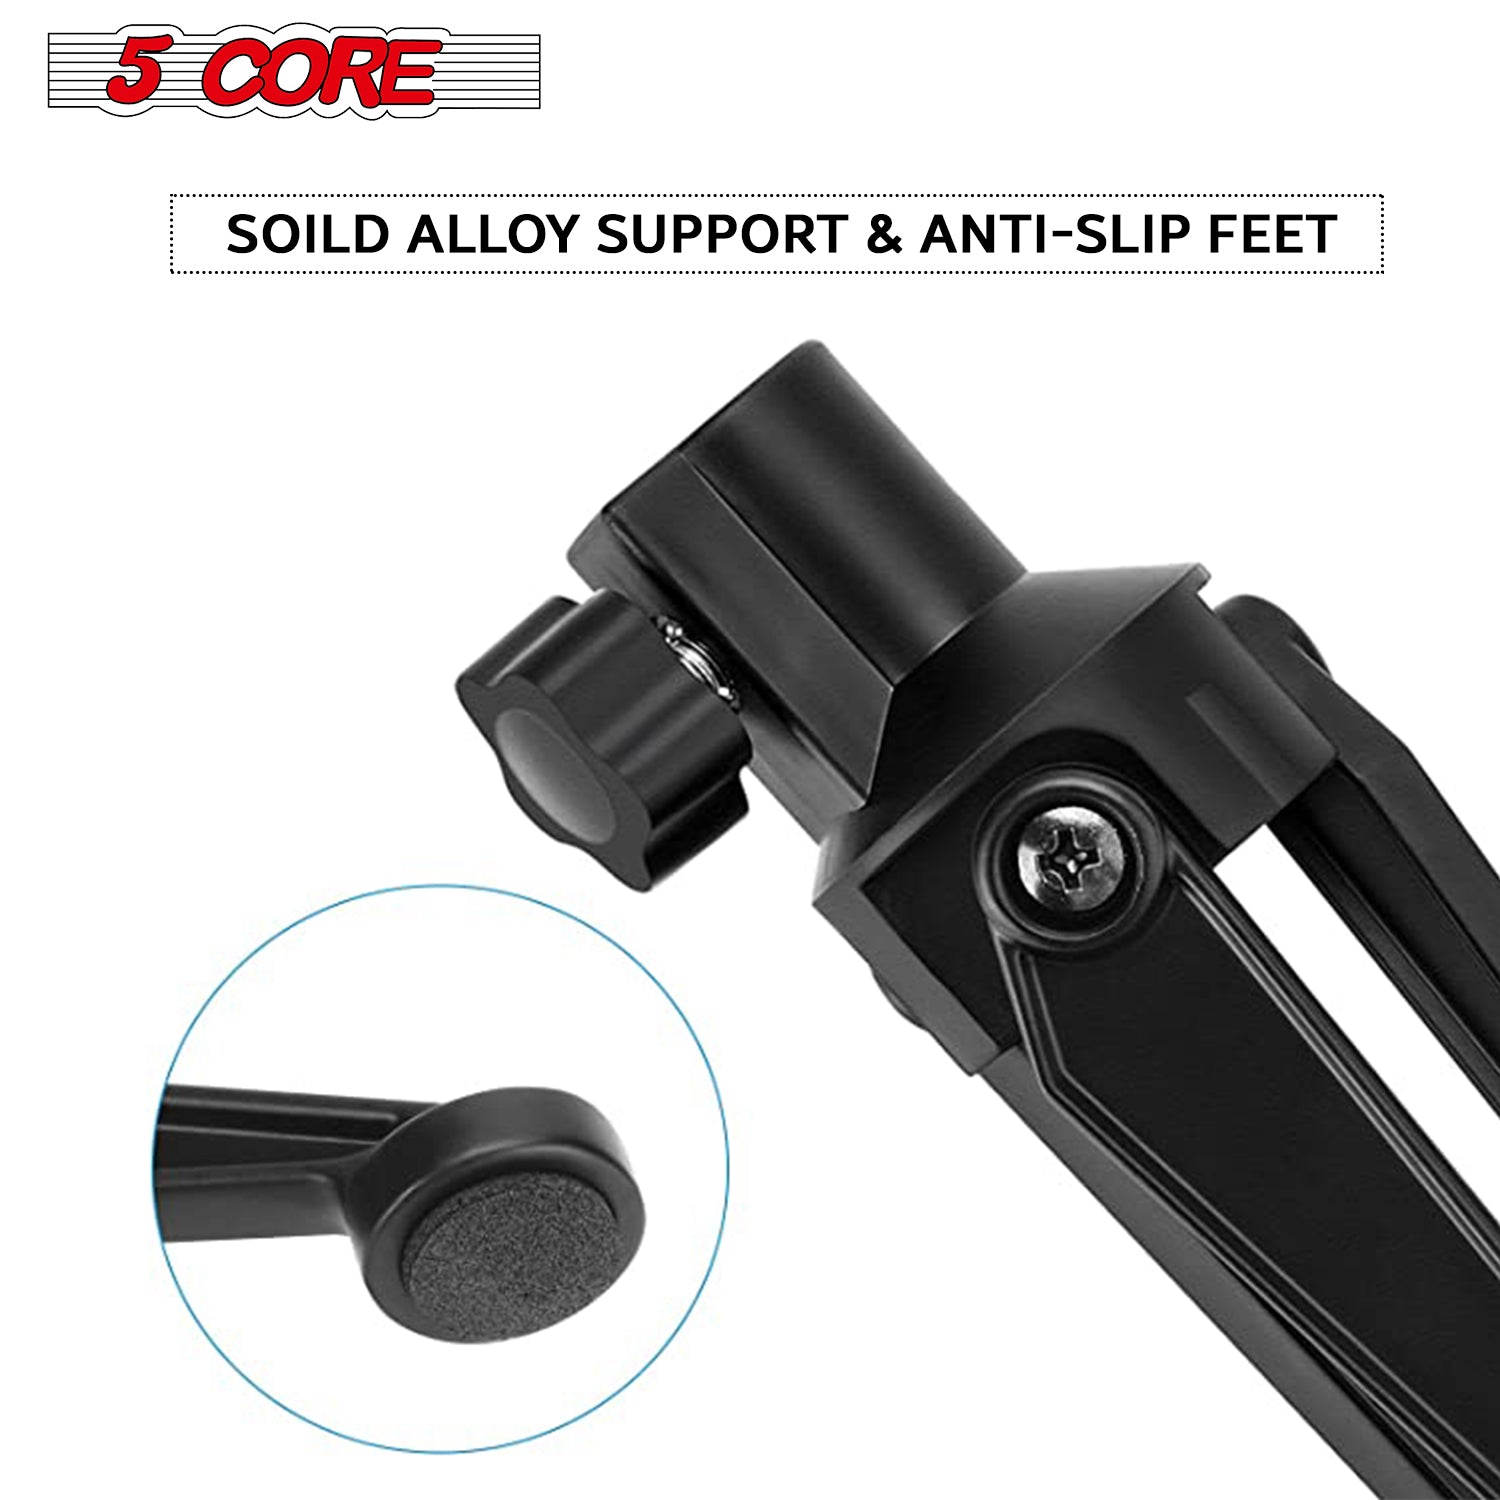 solid alloy support & anti-slip feet